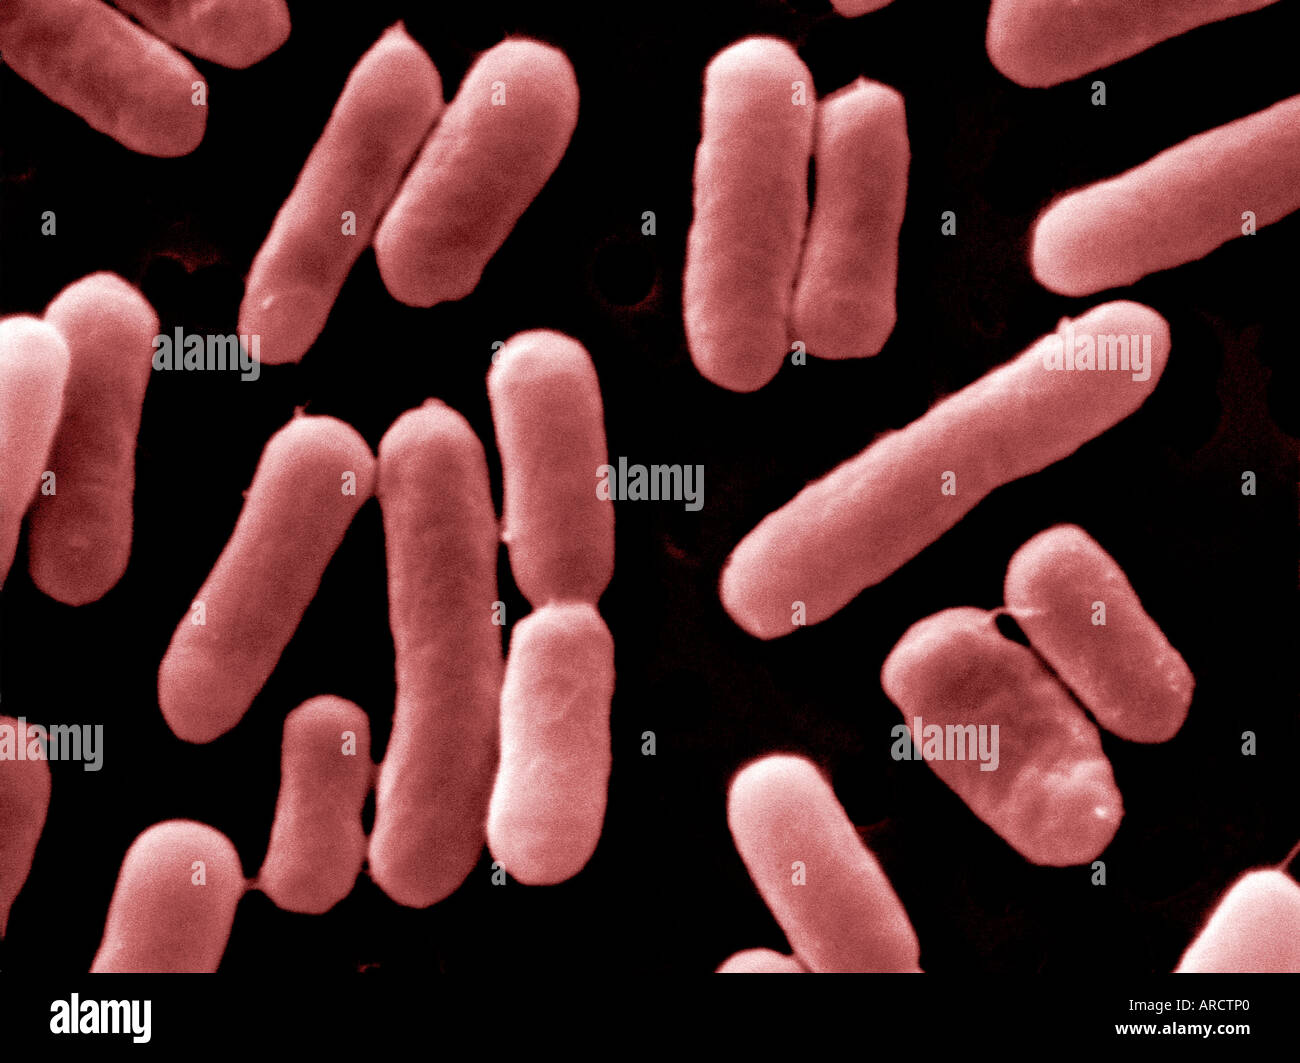 A scanning electron micrograph of Salmonella typhimurium DT 104 Stock Photo  - Alamy